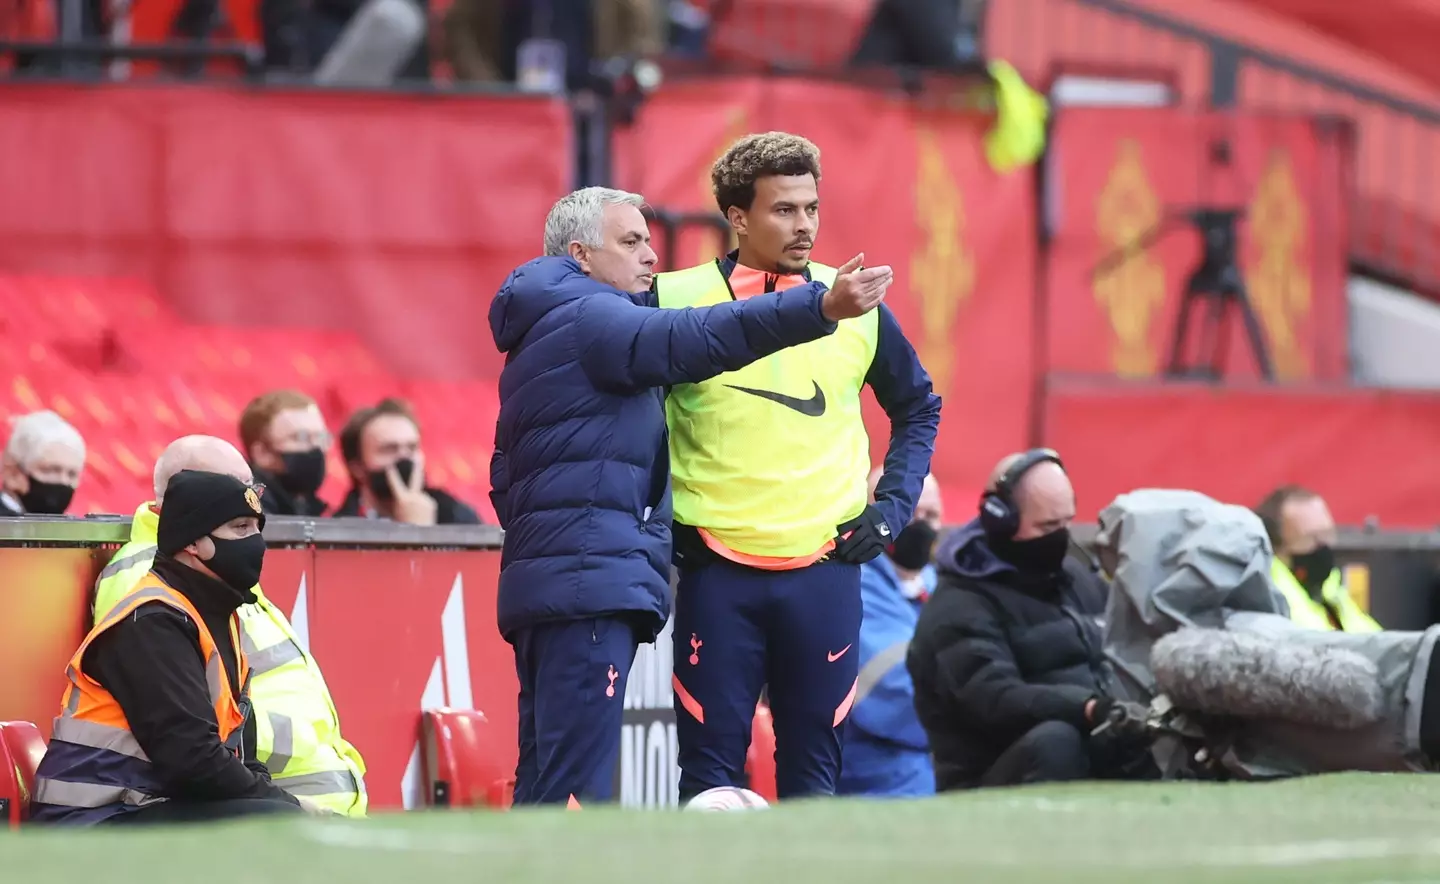 Dele Alli receives instructions from Jose Mourinho before entering the pitch. Image: Getty